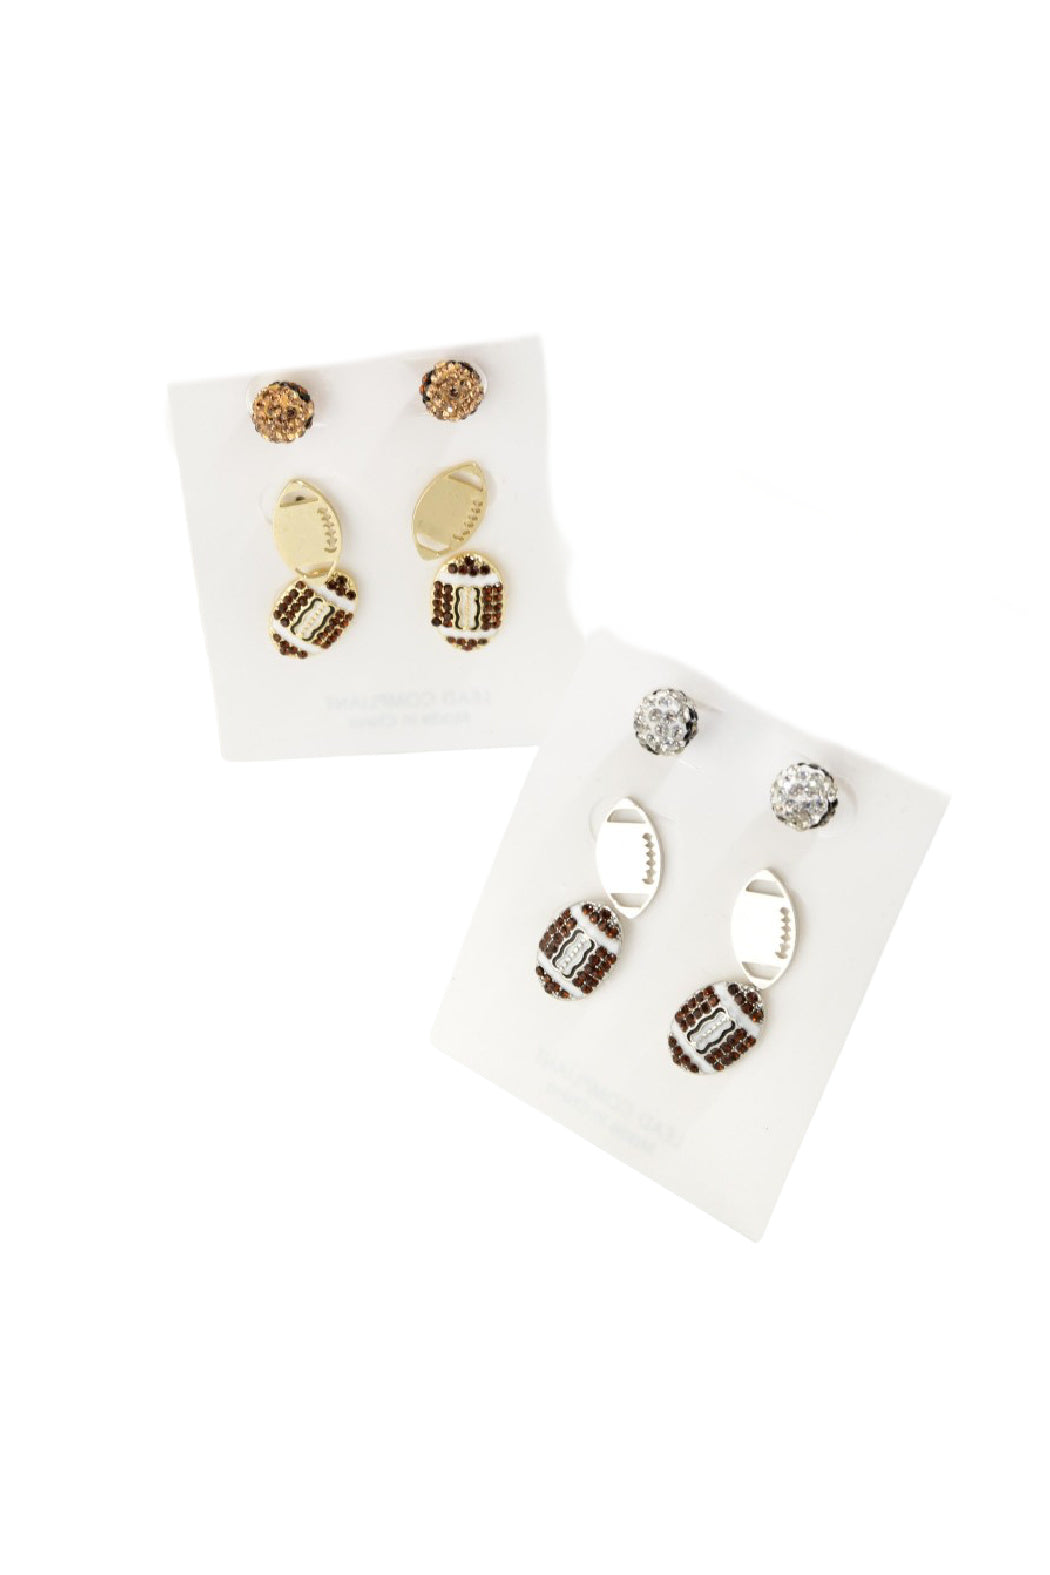 Set of 3 Game Day Football Earrings